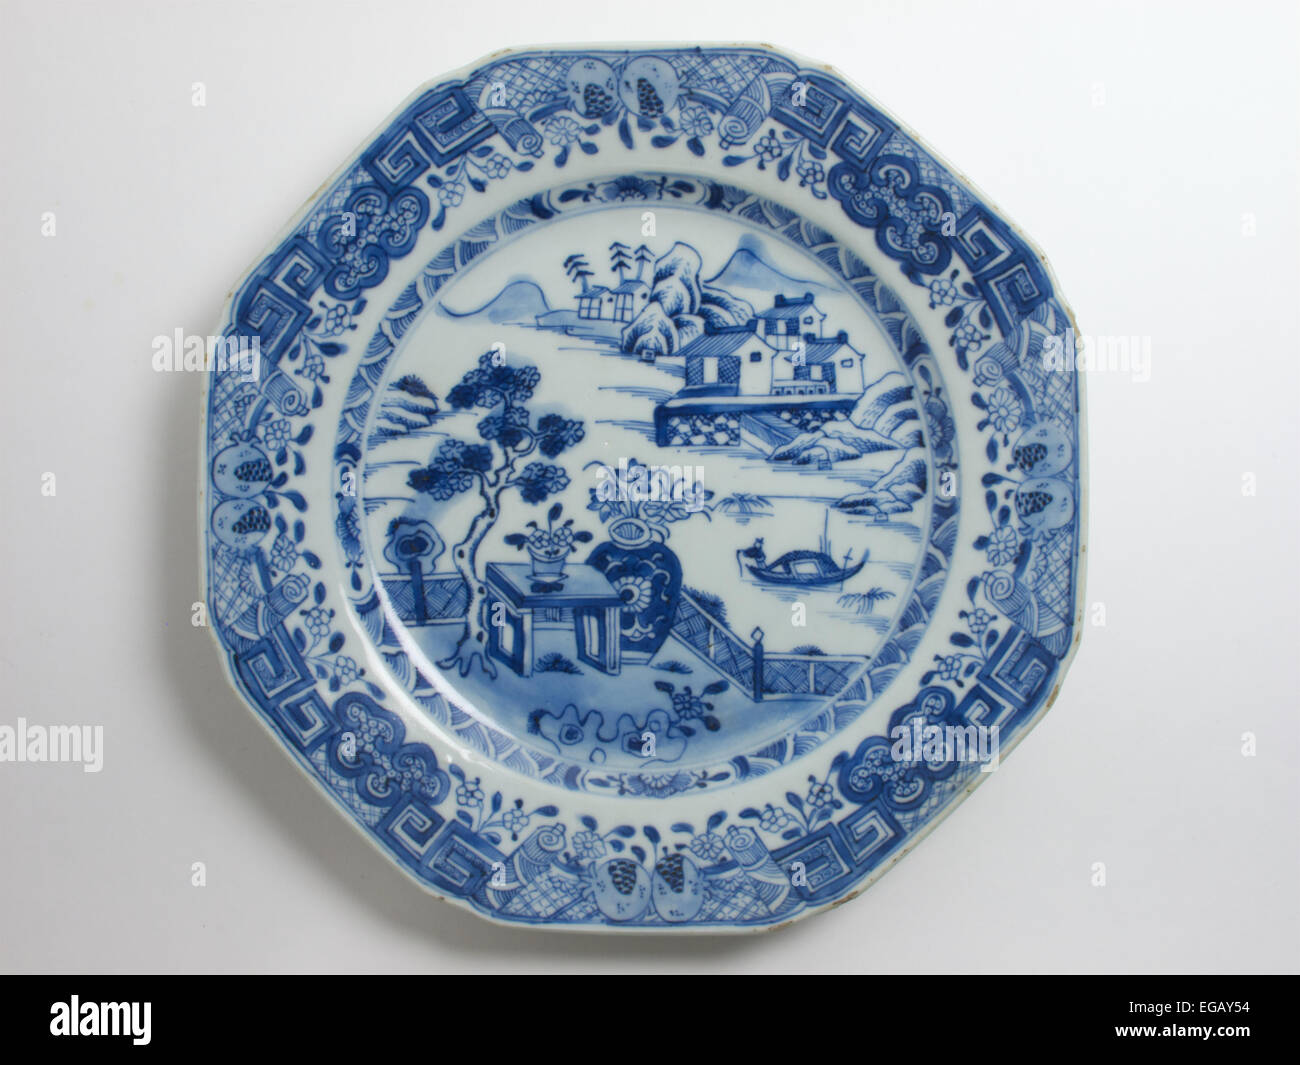 China antique Porcelain Blue and white Hand-painted Landscape plate